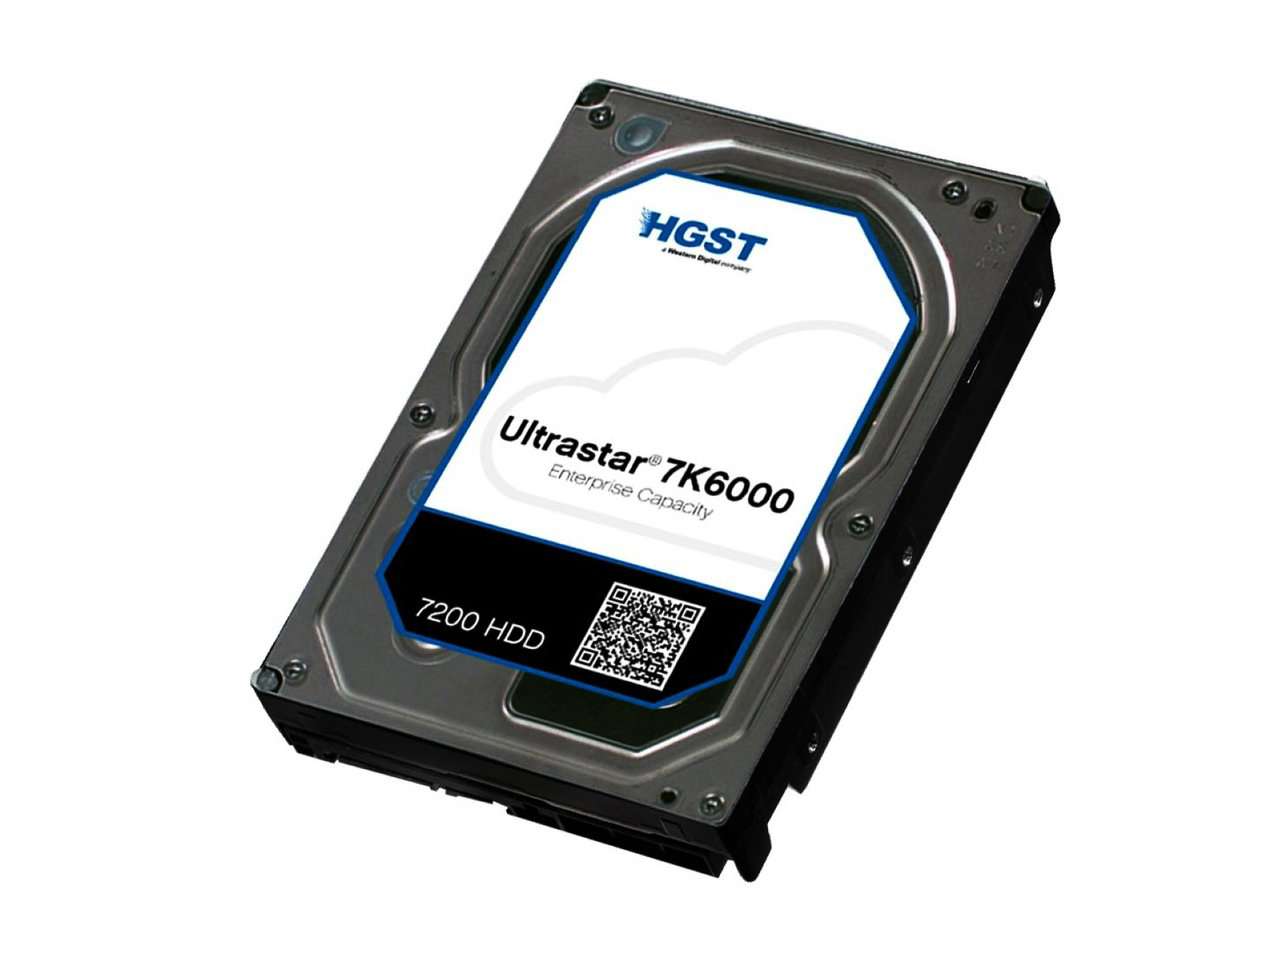 HGST Ultrastar 7K6000 0F22962  HUS726040ALS215 4TB 7.2K RPM SAS 12Gb/s 512n 128MB Cache 3.5" TCG FIPS Manufacturer Recertified HDD